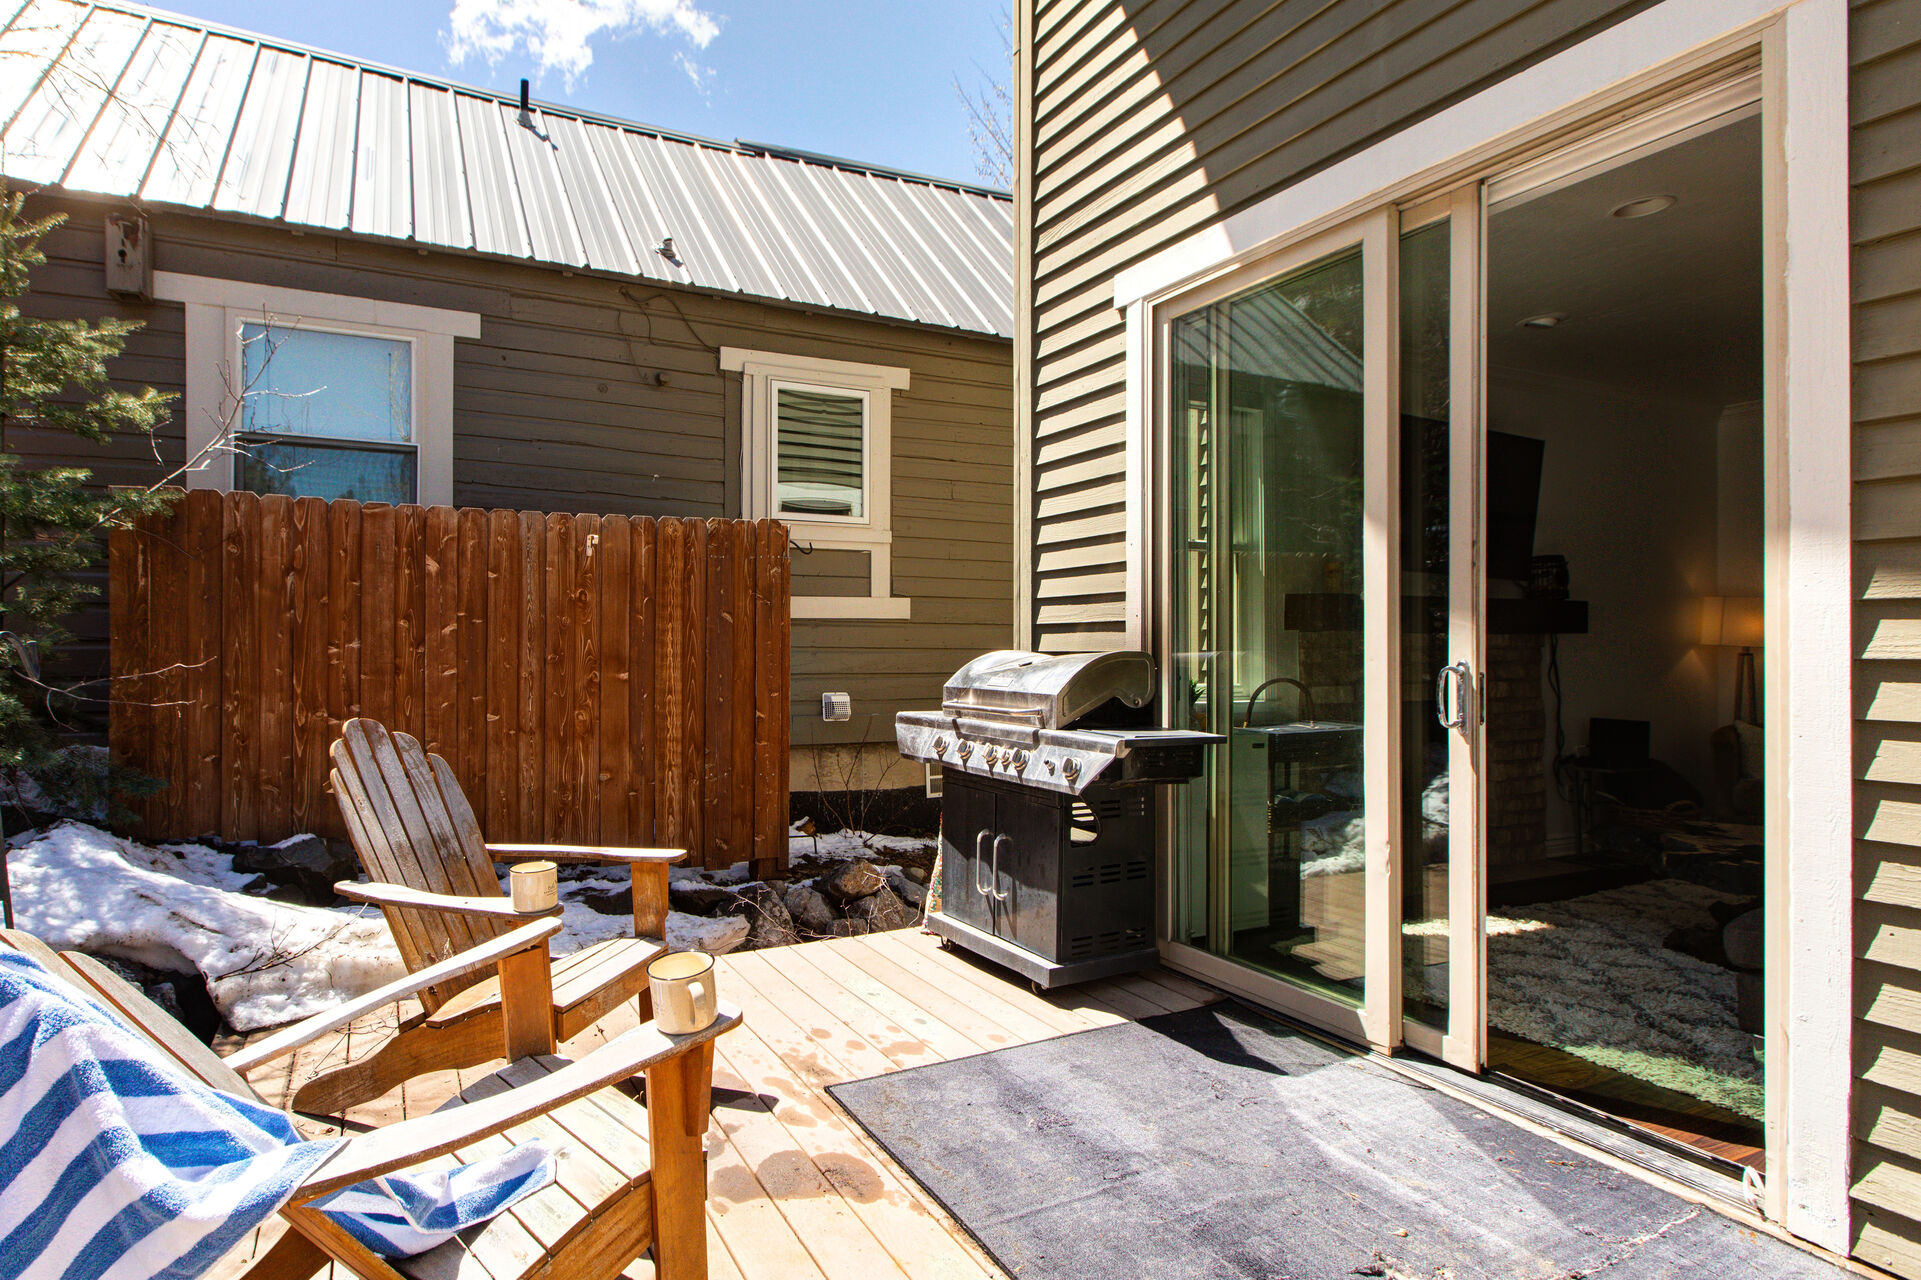 Private Patio with BBQ Grill, adirondack chairs, and private hot tub